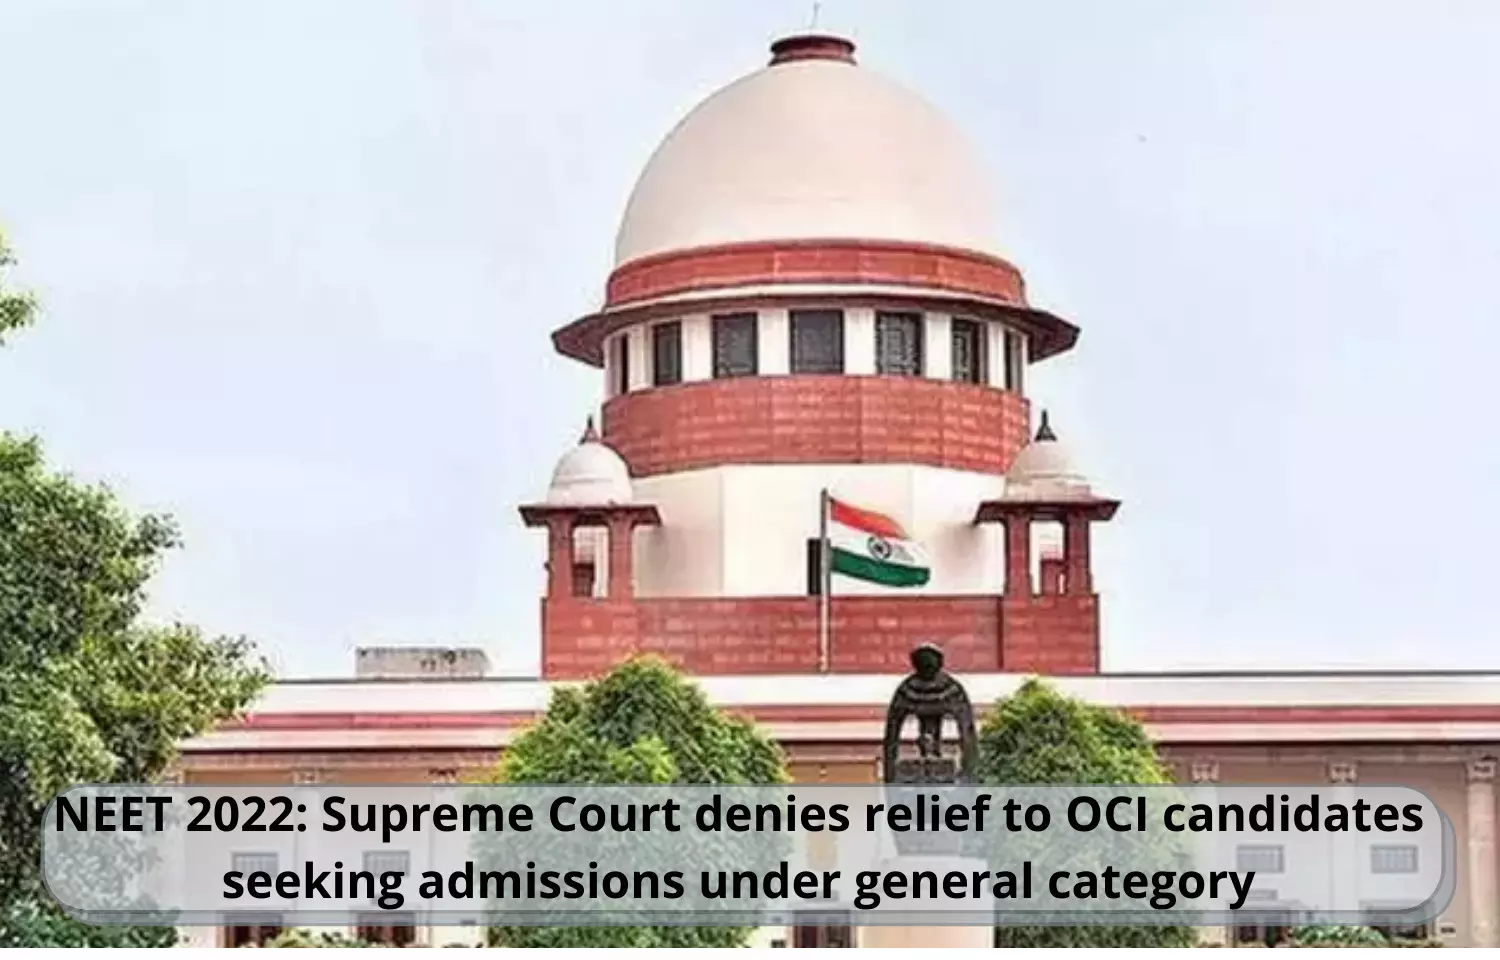 NEET 2022: SC denies relief to OCI candidates seeking admissions under general category